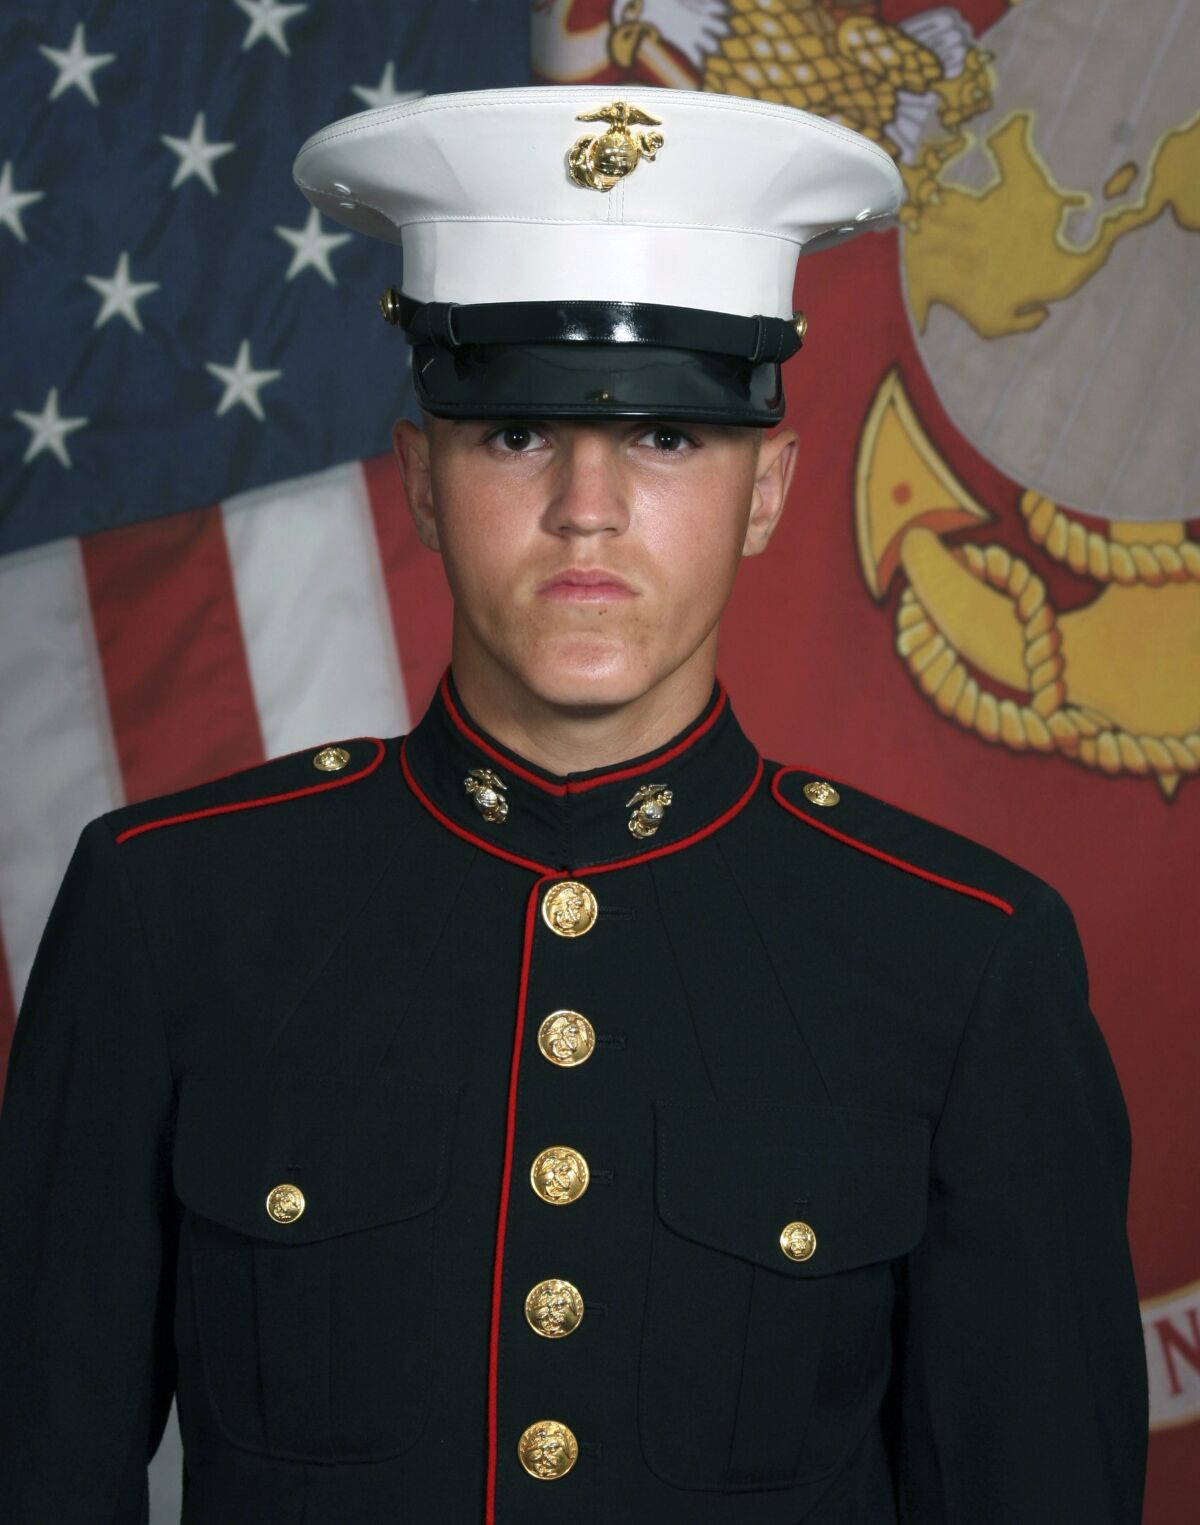 FILE - In this undated photo provided by the 1st Marine Division, Camp Pendleton/U.S. Marines, Lance Cpl. Rylee J. McCollum, 20, is pictured. McCollum was among 13 U.S. soldiers killed in a suicide bombing Aug. 26, 2021, at the airport in Kabul, Afghanistan. The widow and two sisters of McCollum are suing actor Alec Baldwin, alleging he exposed them to a flood of social media hatred and insults by claiming on Instagram that one sister was an "insurrectionist" for participating in the Jan. 6, 2021, demonstration in support of former President Donald Trump in Washington, D.C. (U.S. Marines via AP, File)